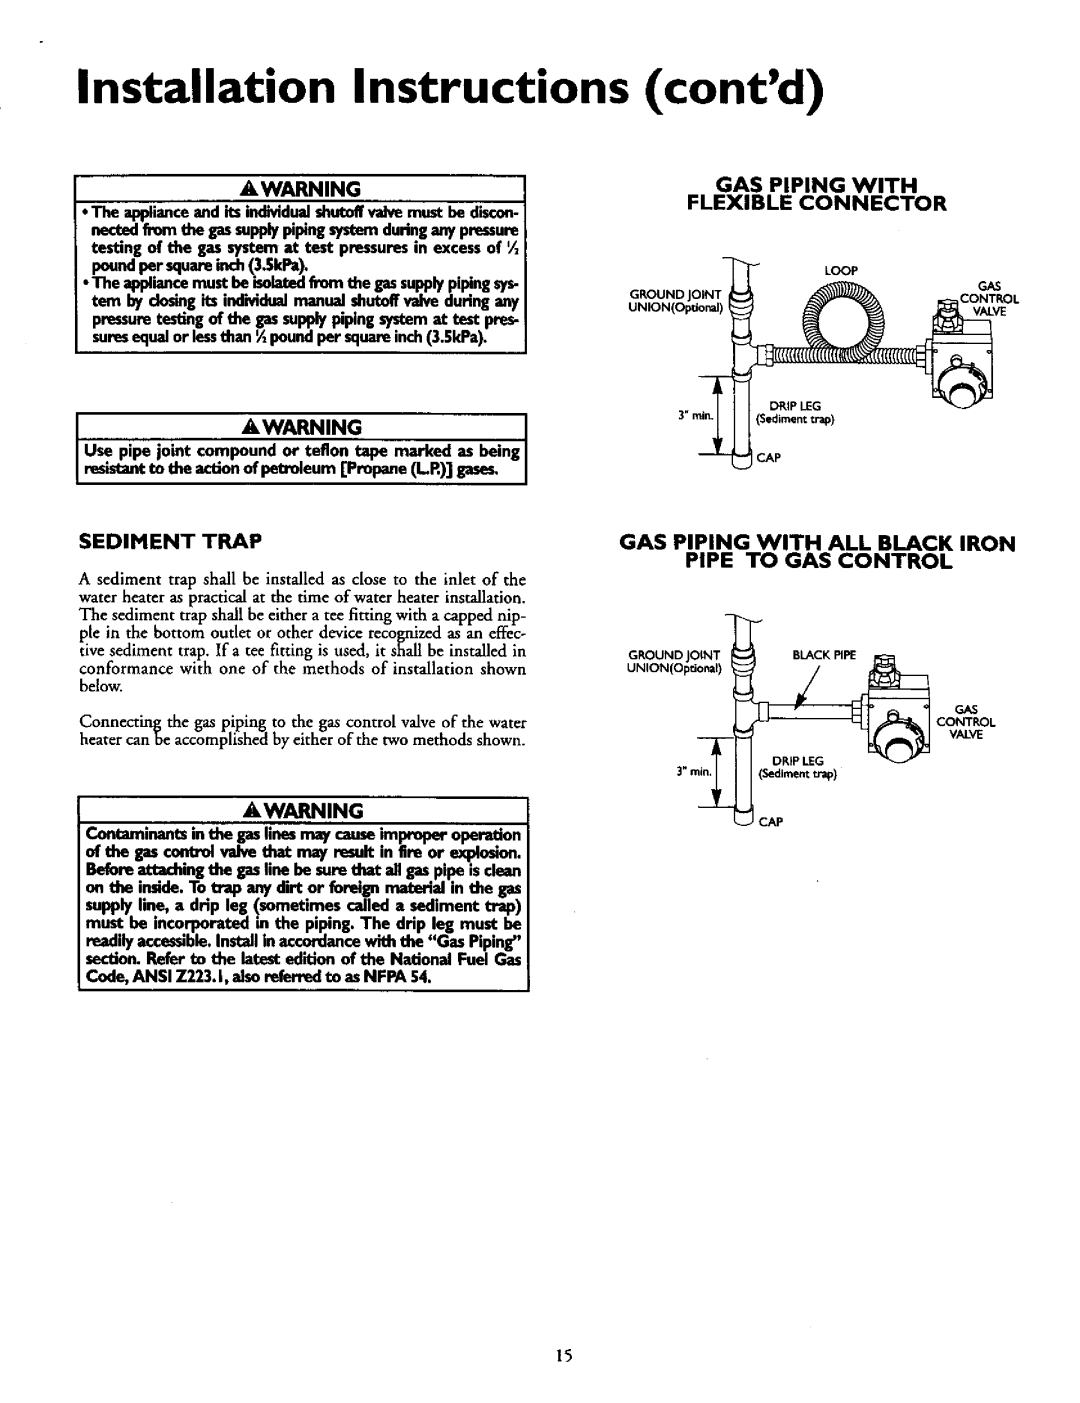 Kenmore 153.3304OI Installation Instructions, contd, Flexible, Connector, Gas Piping With All Black Iron, Awarning 